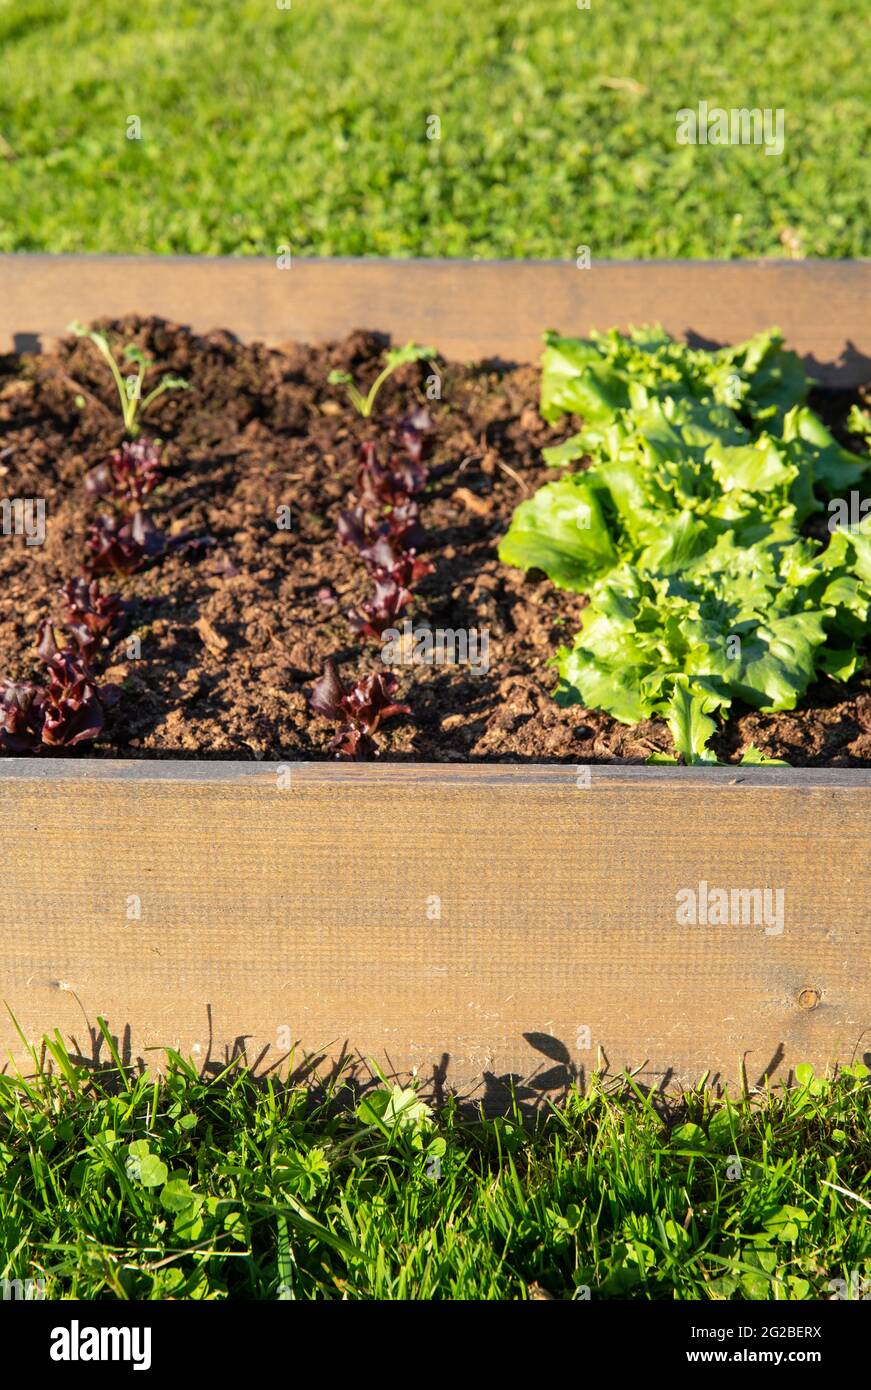 Selective focus on heat treated wood raised garden bed. Boxes filled with soil and with various vegetable plants growing inside small field. Stock Photo